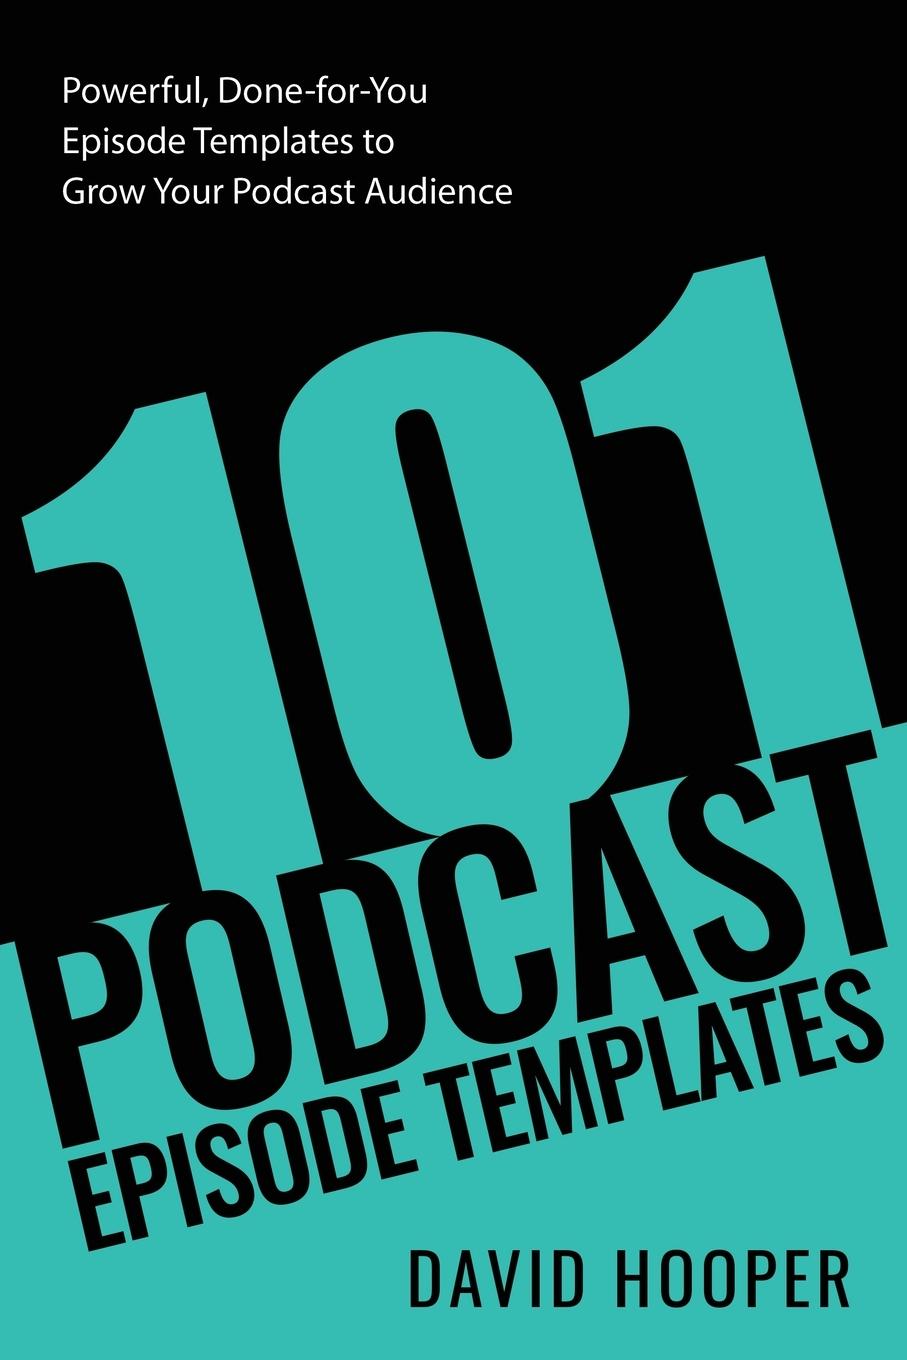 Carte 101 Podcast Episode Templates - Powerful, Done-for-You Episode Templates to Grow Your Podcast Audience 